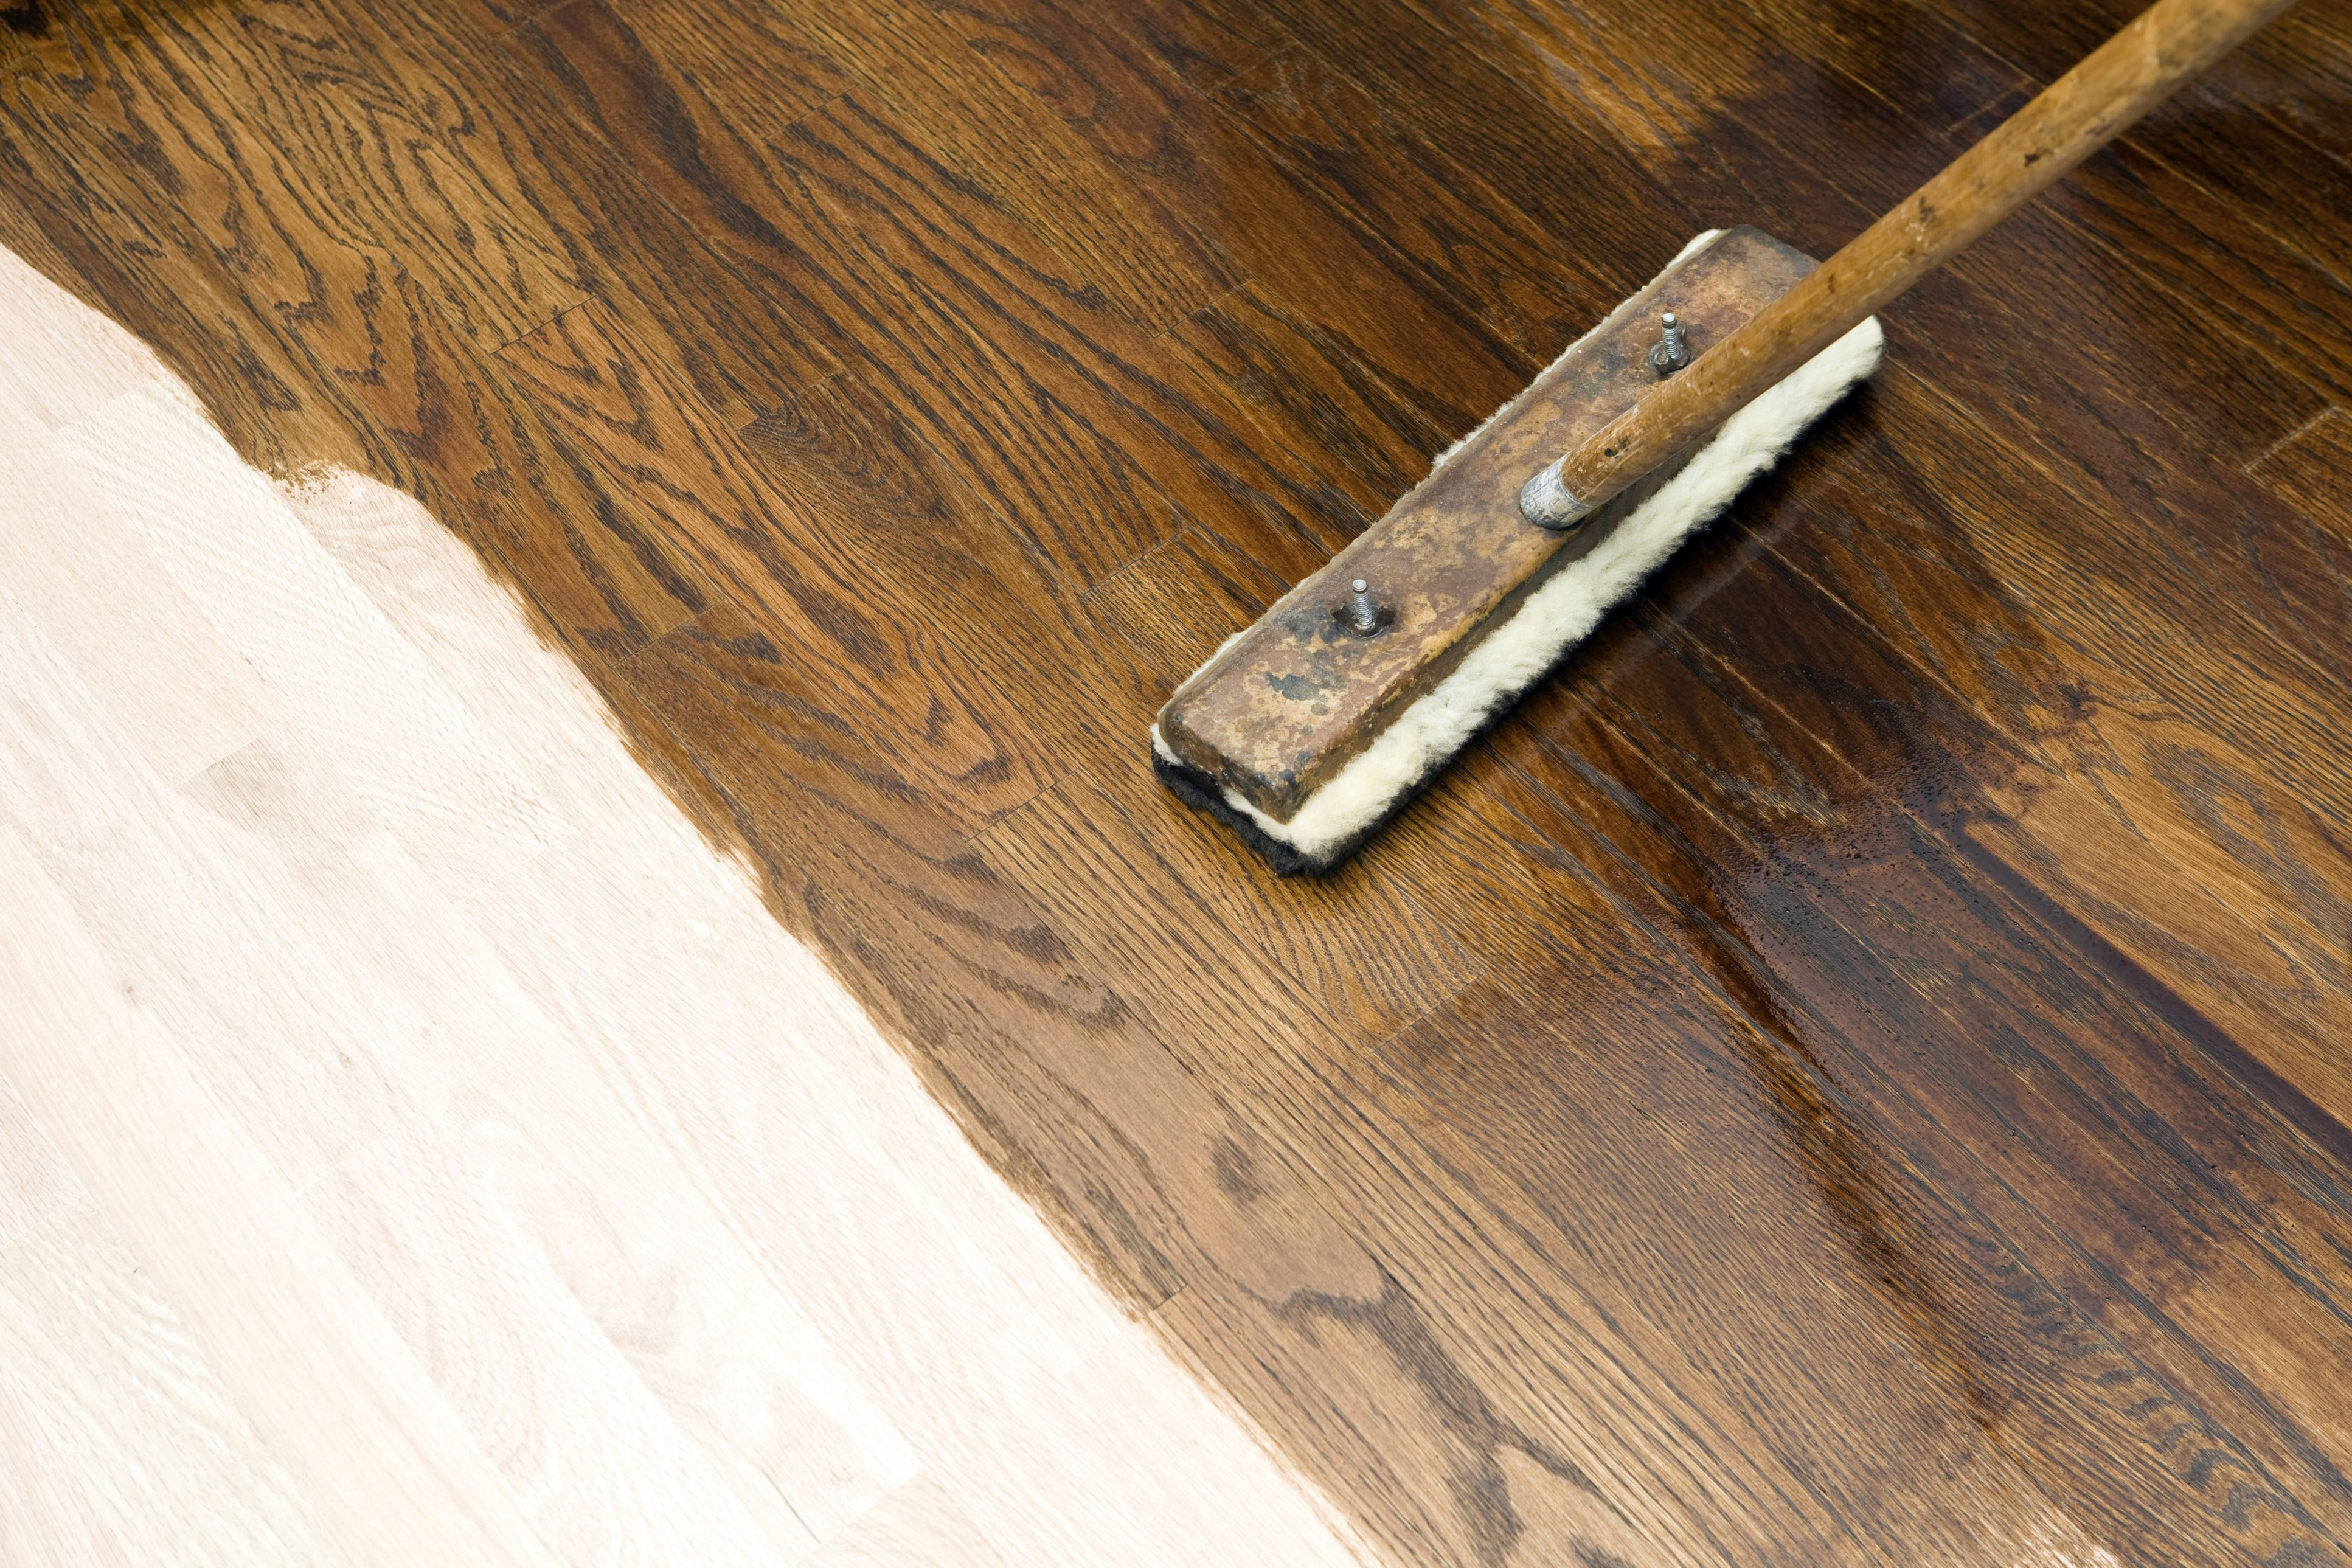 How Much Does It Cost to Install Laminate Hardwood Floors Of How to Build Equity What It Means to Own More Of Your Home Intended for Dark Stain Application On New Oak Hardwood Floor 184881406 573e139f5f9b58723d7a472d